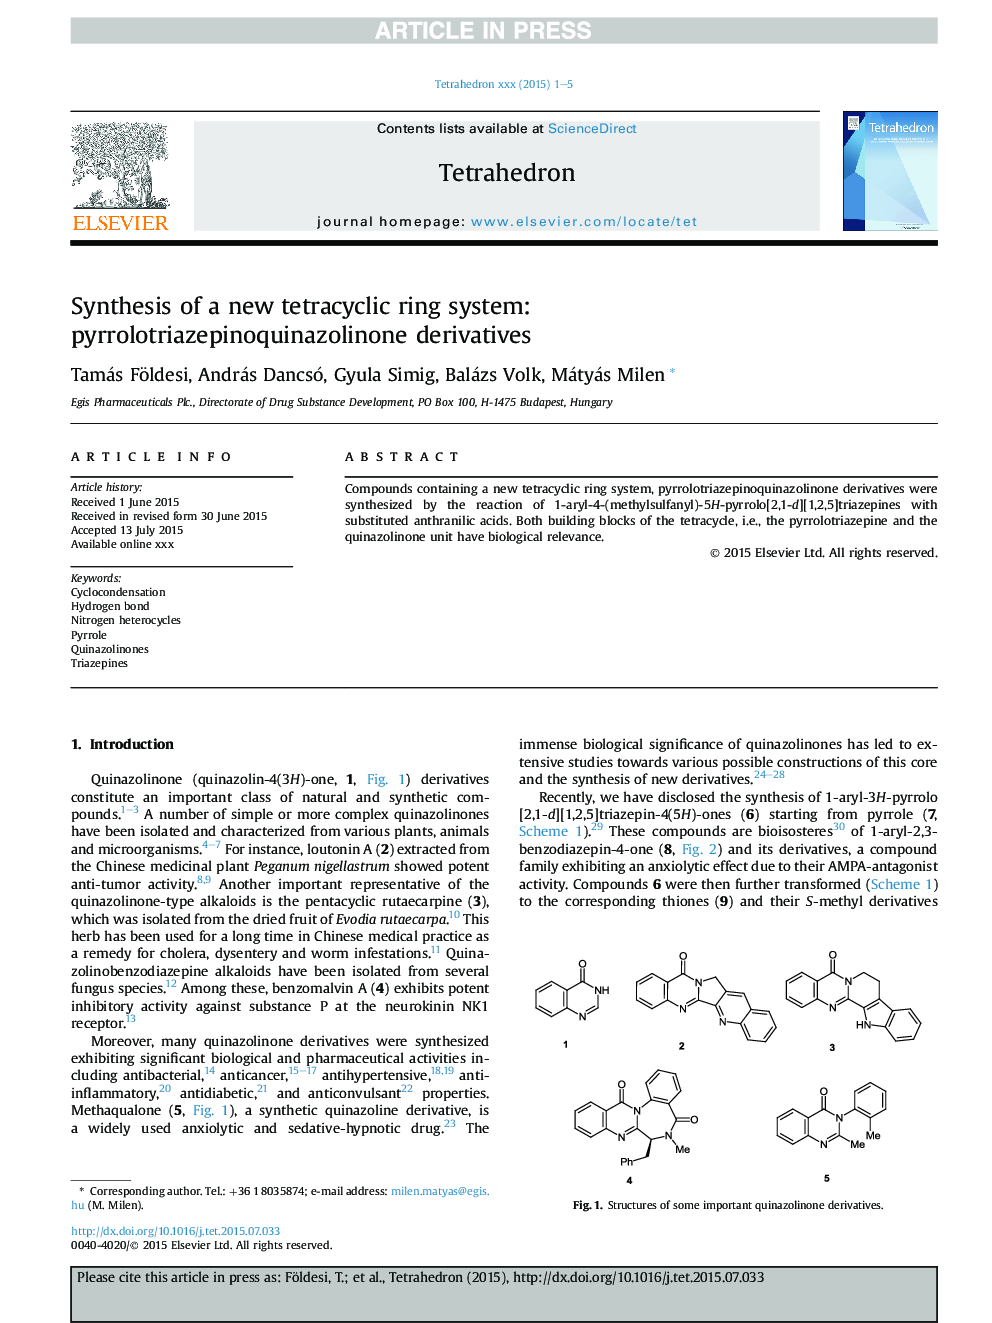 Synthesis of a new tetracyclic ring system: pyrrolotriazepinoquinazolinone derivatives